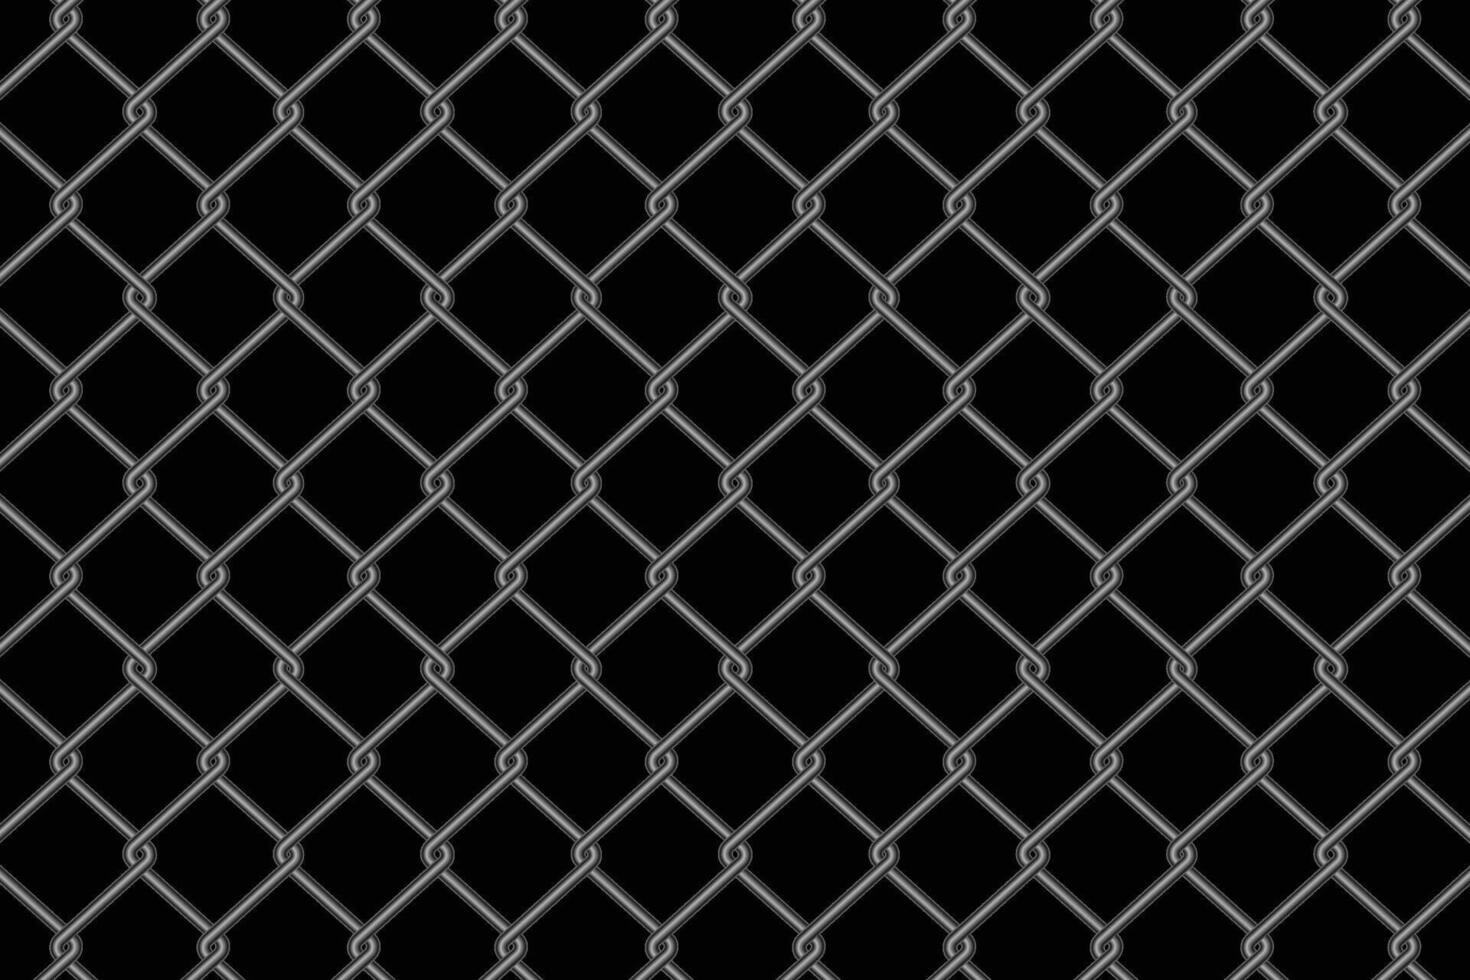 metallic chain link fence pattern on black background vector